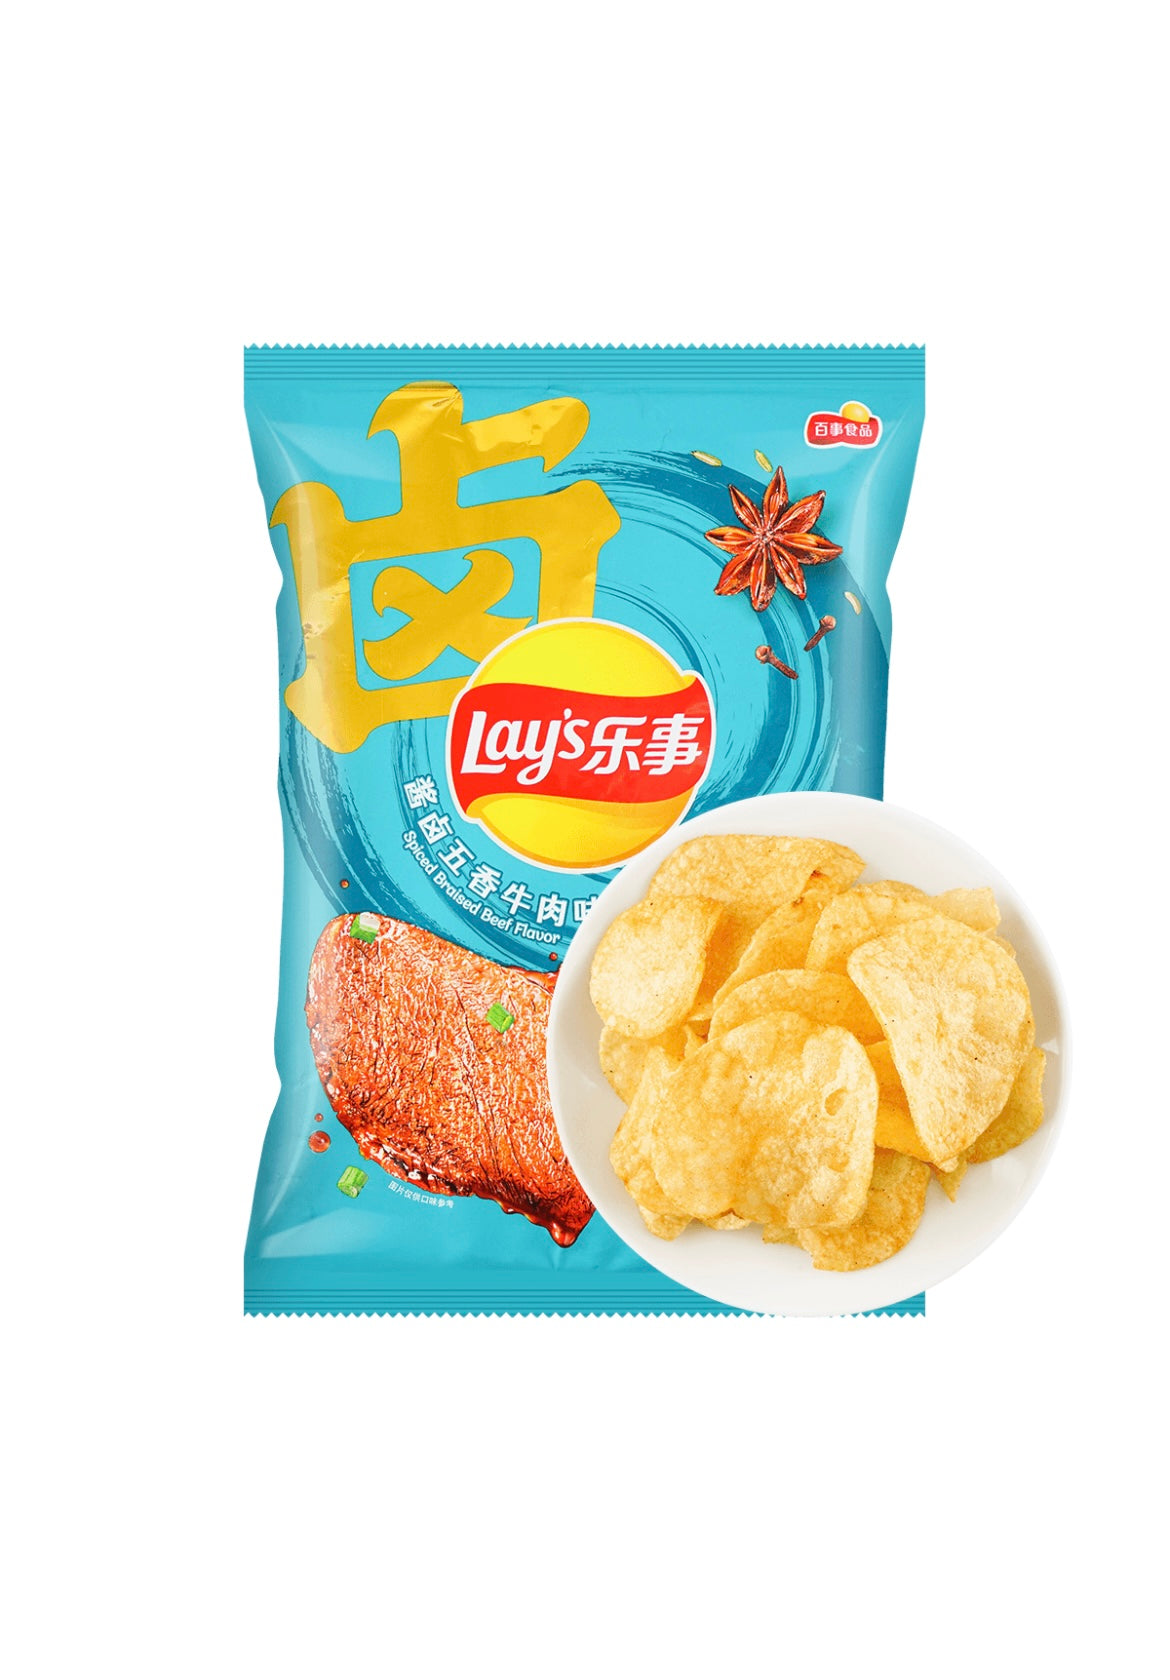 Lays Spiced Braised Beef (China)